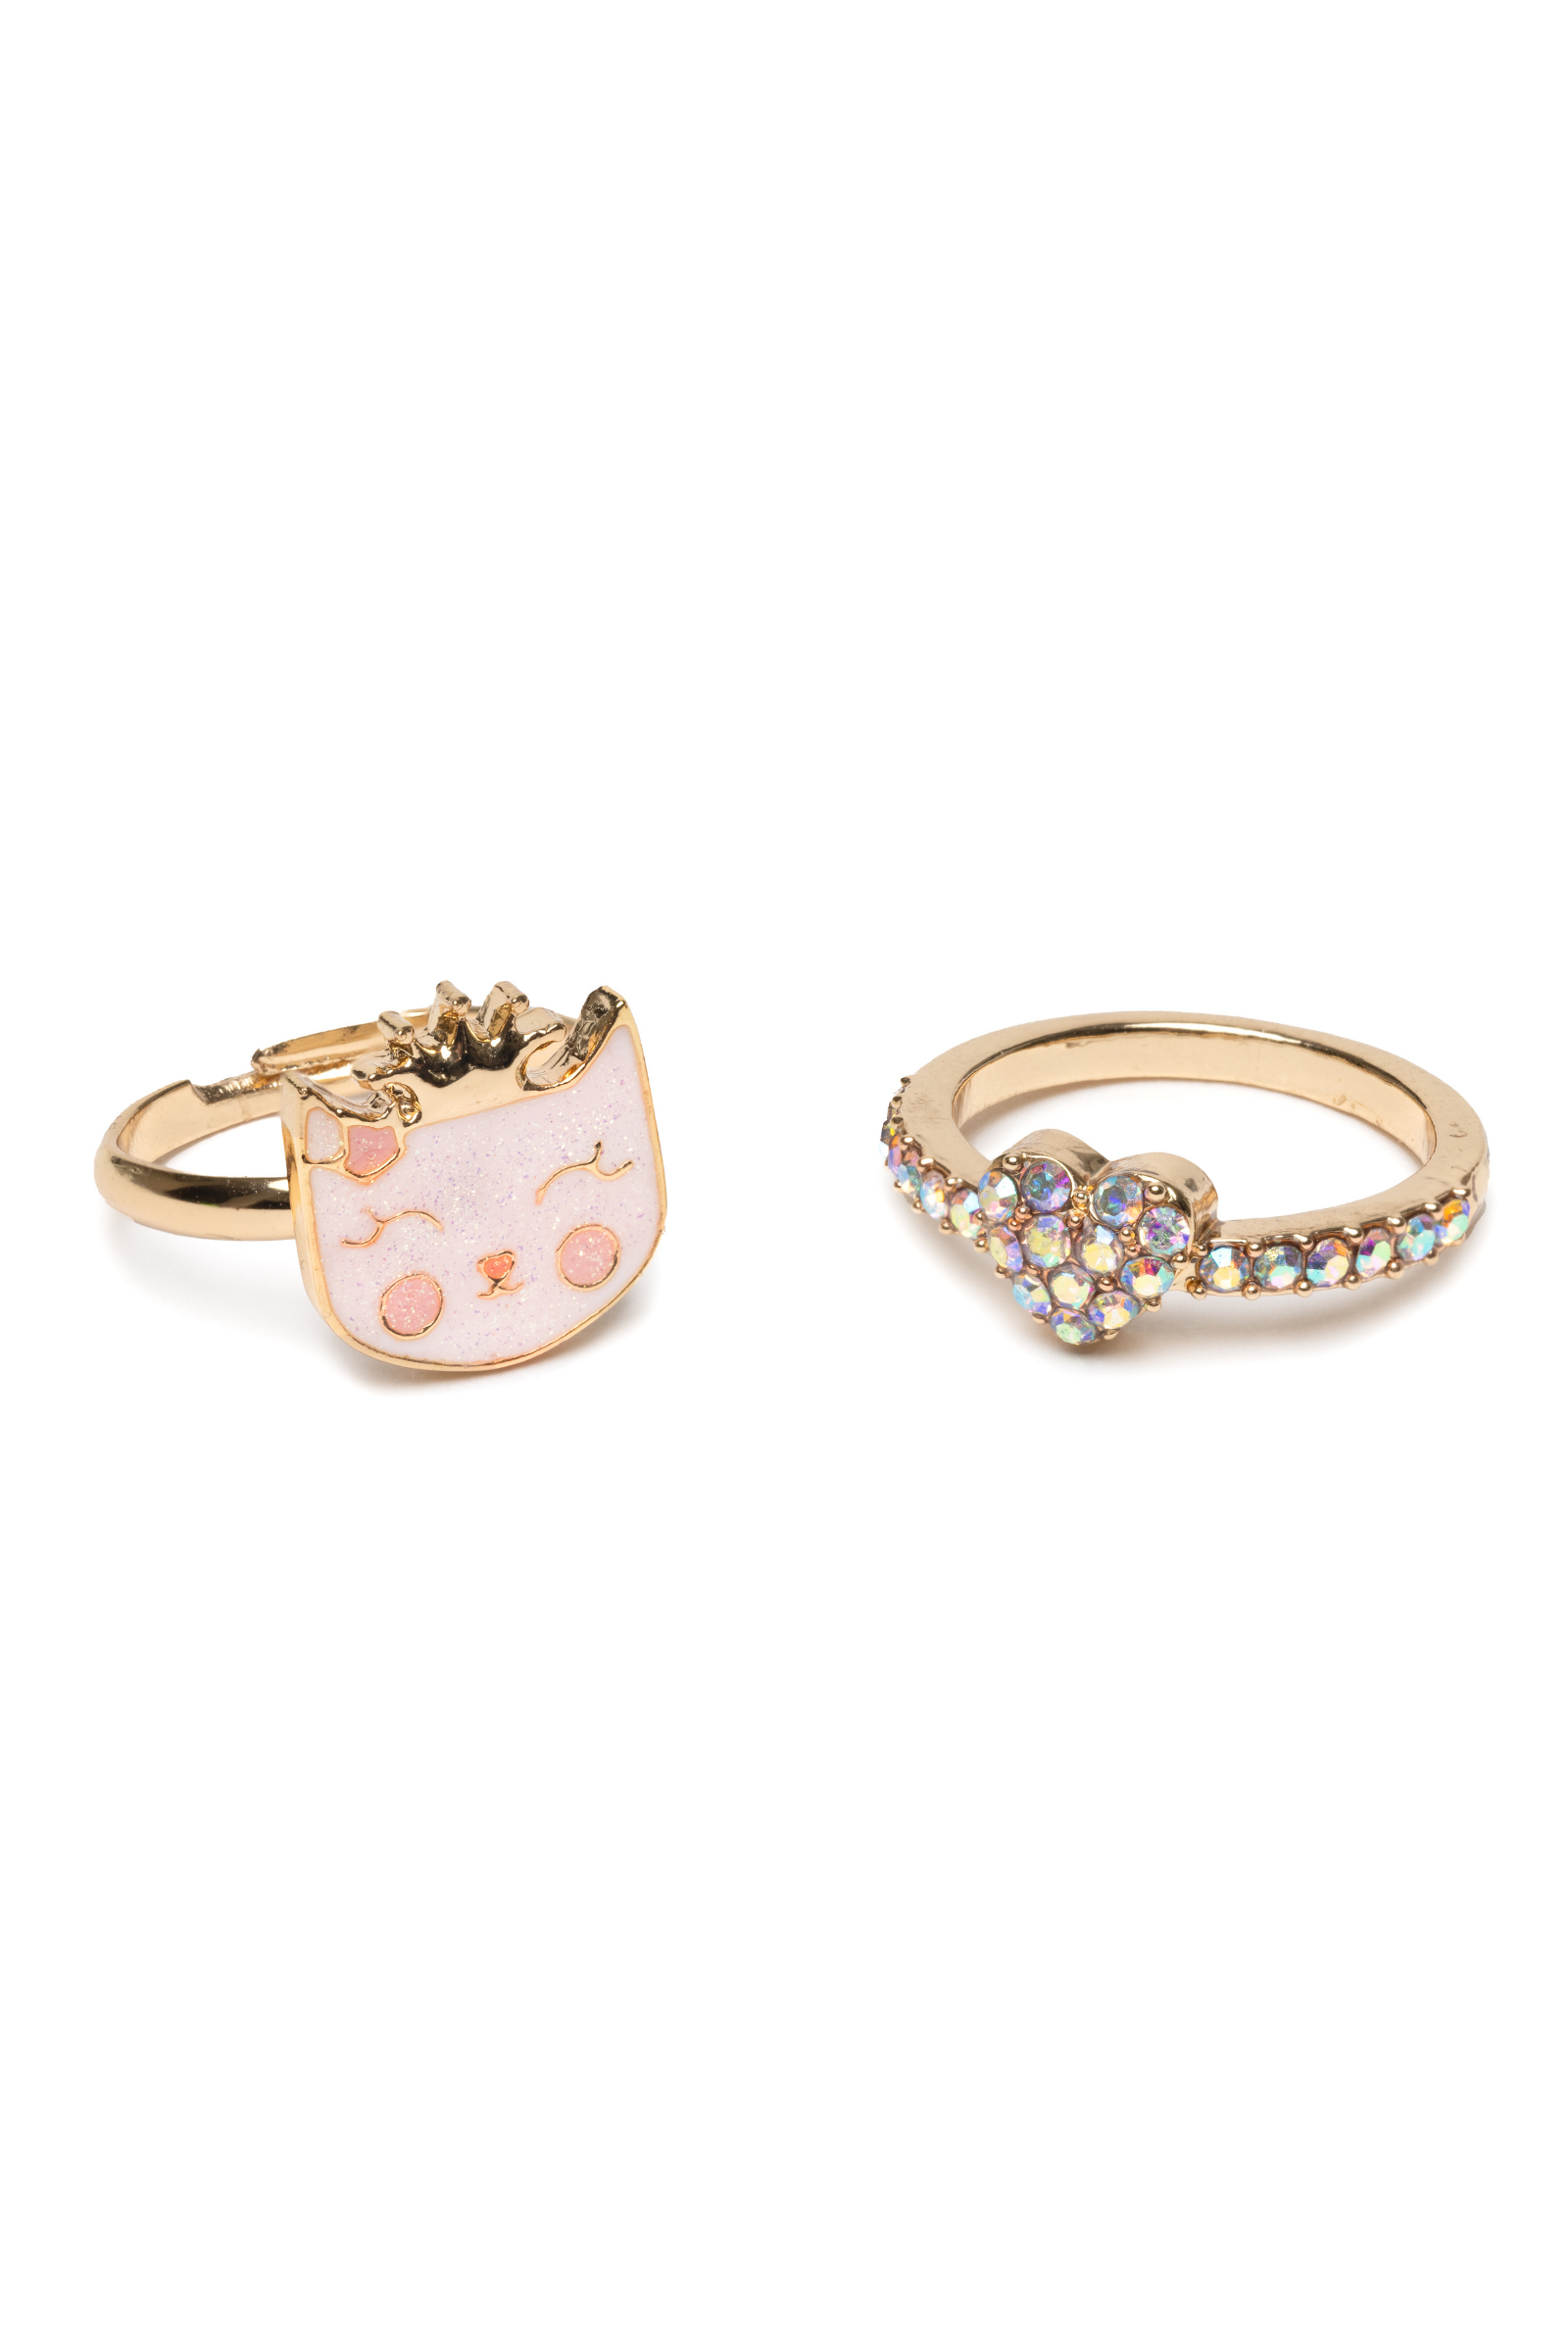 Boutique Kitty Love Ring Set